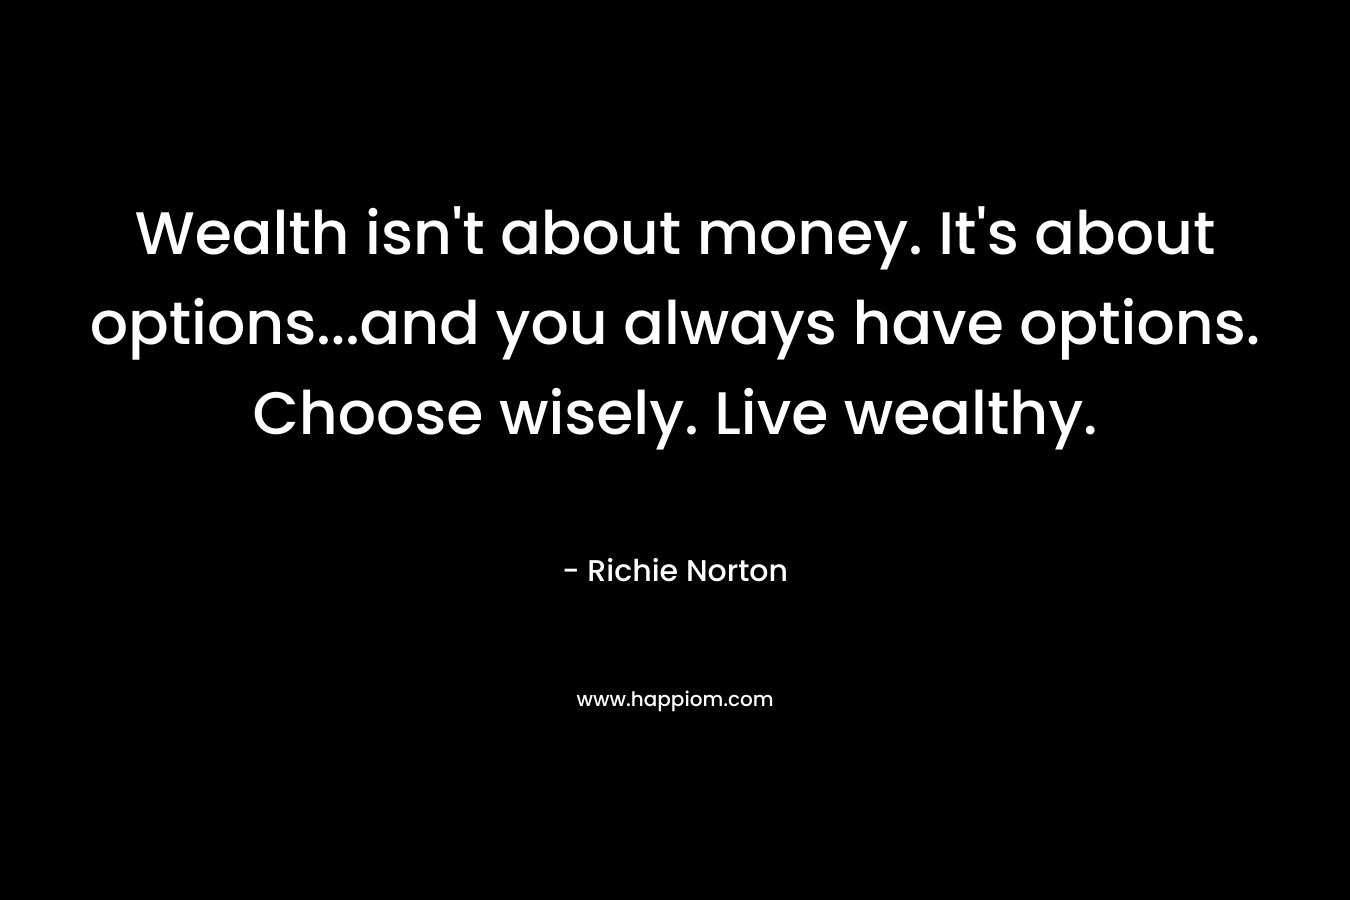 Wealth isn’t about money. It’s about options…and you always have options. Choose wisely. Live wealthy. – Richie Norton